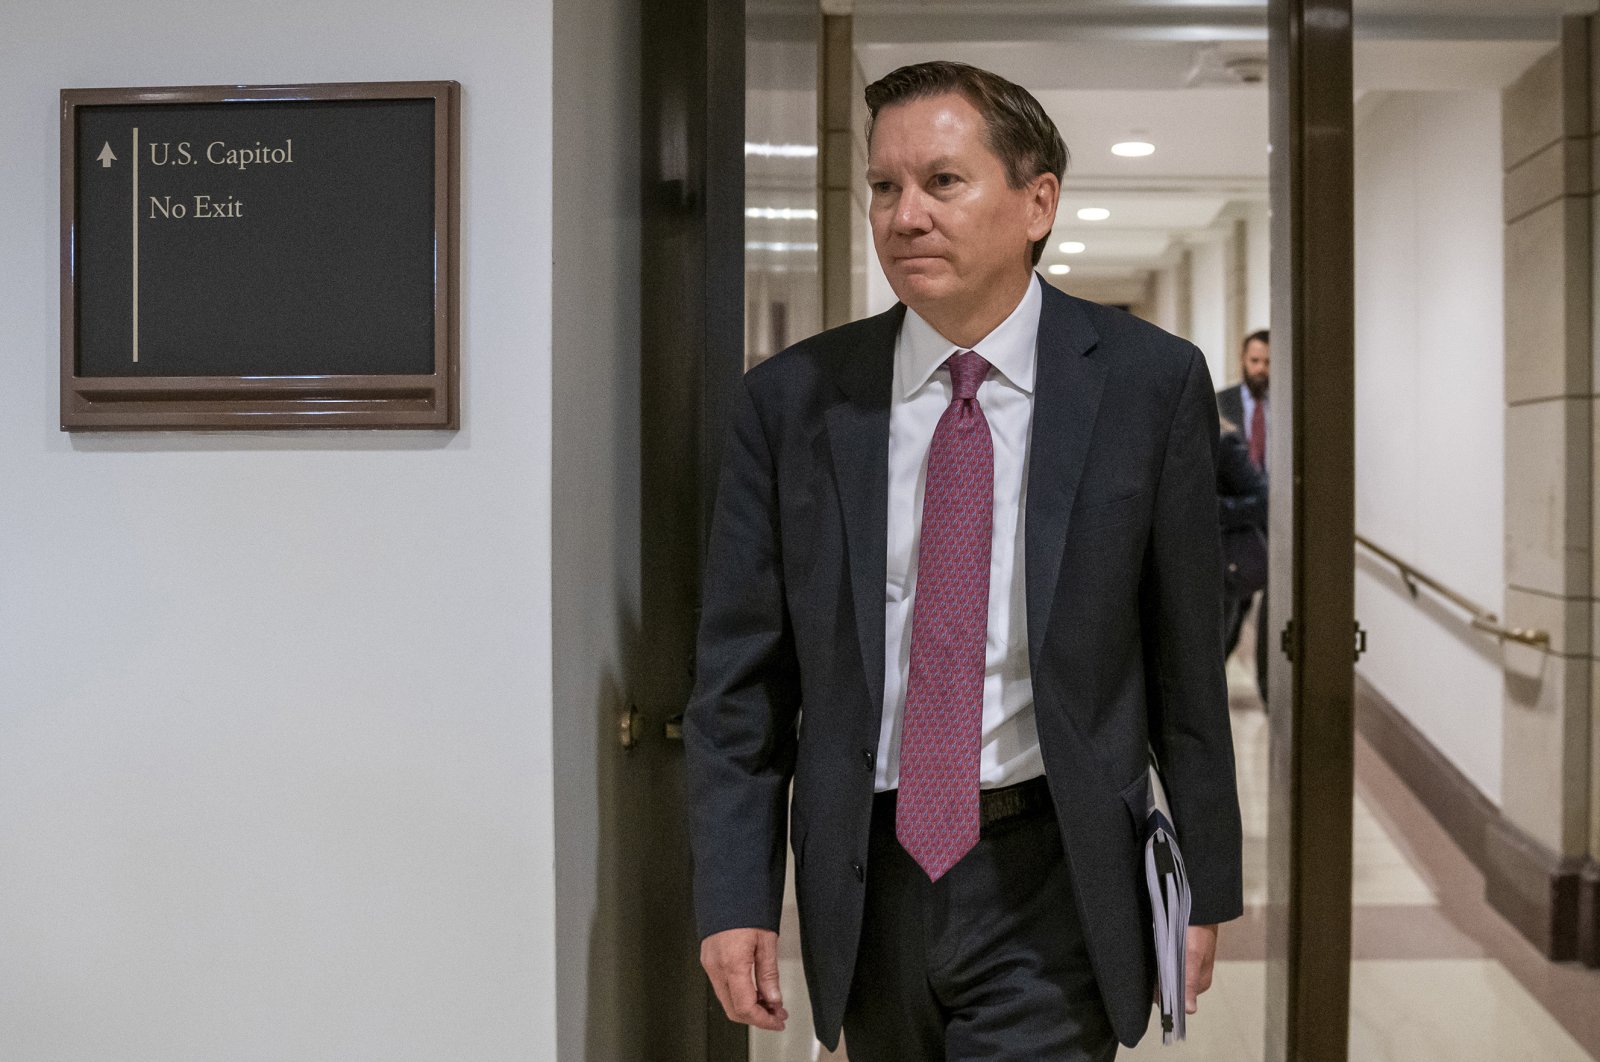 In this file photo, Michael Atkinson, the inspector general of the intelligence community, arrives at the Capitol in Washington for closed-door questioning about a whistleblower complaint that triggered President Donald Trump's impeachment, Washington D.C., Oct. 4, 2019. (AP Photo)